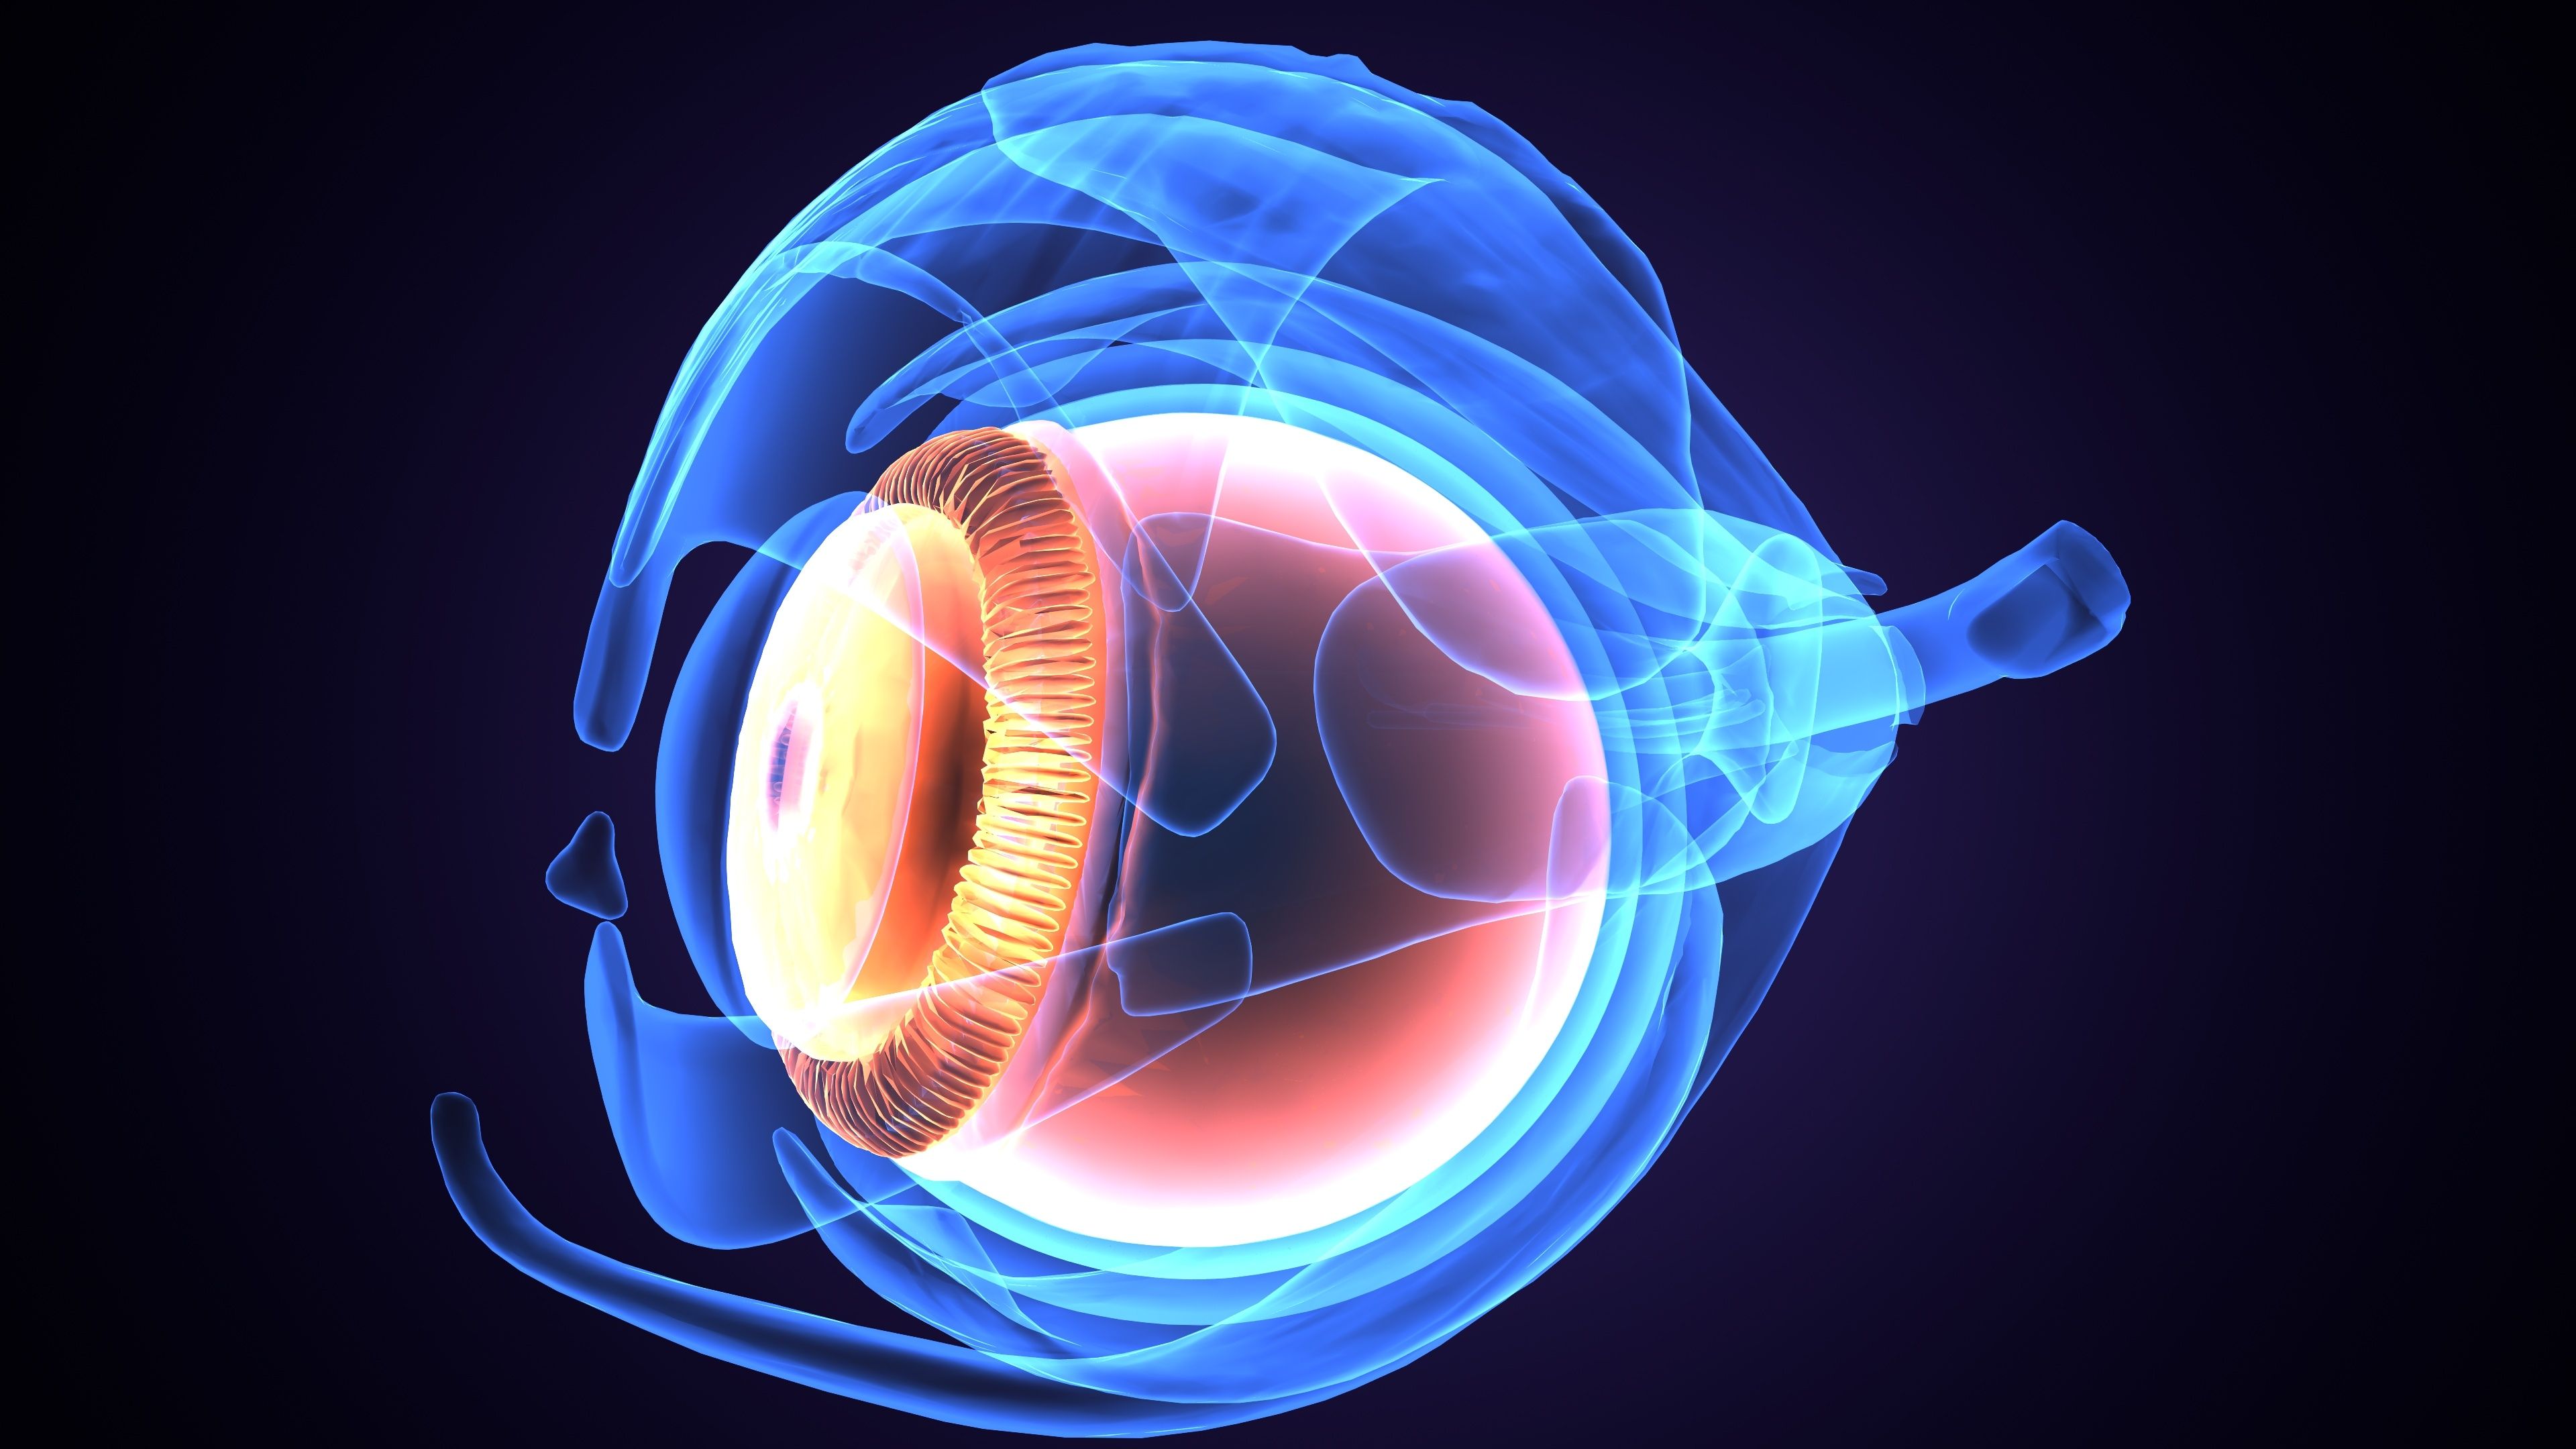 ADVM-022: Sustained anatomic improvements for wet AMD